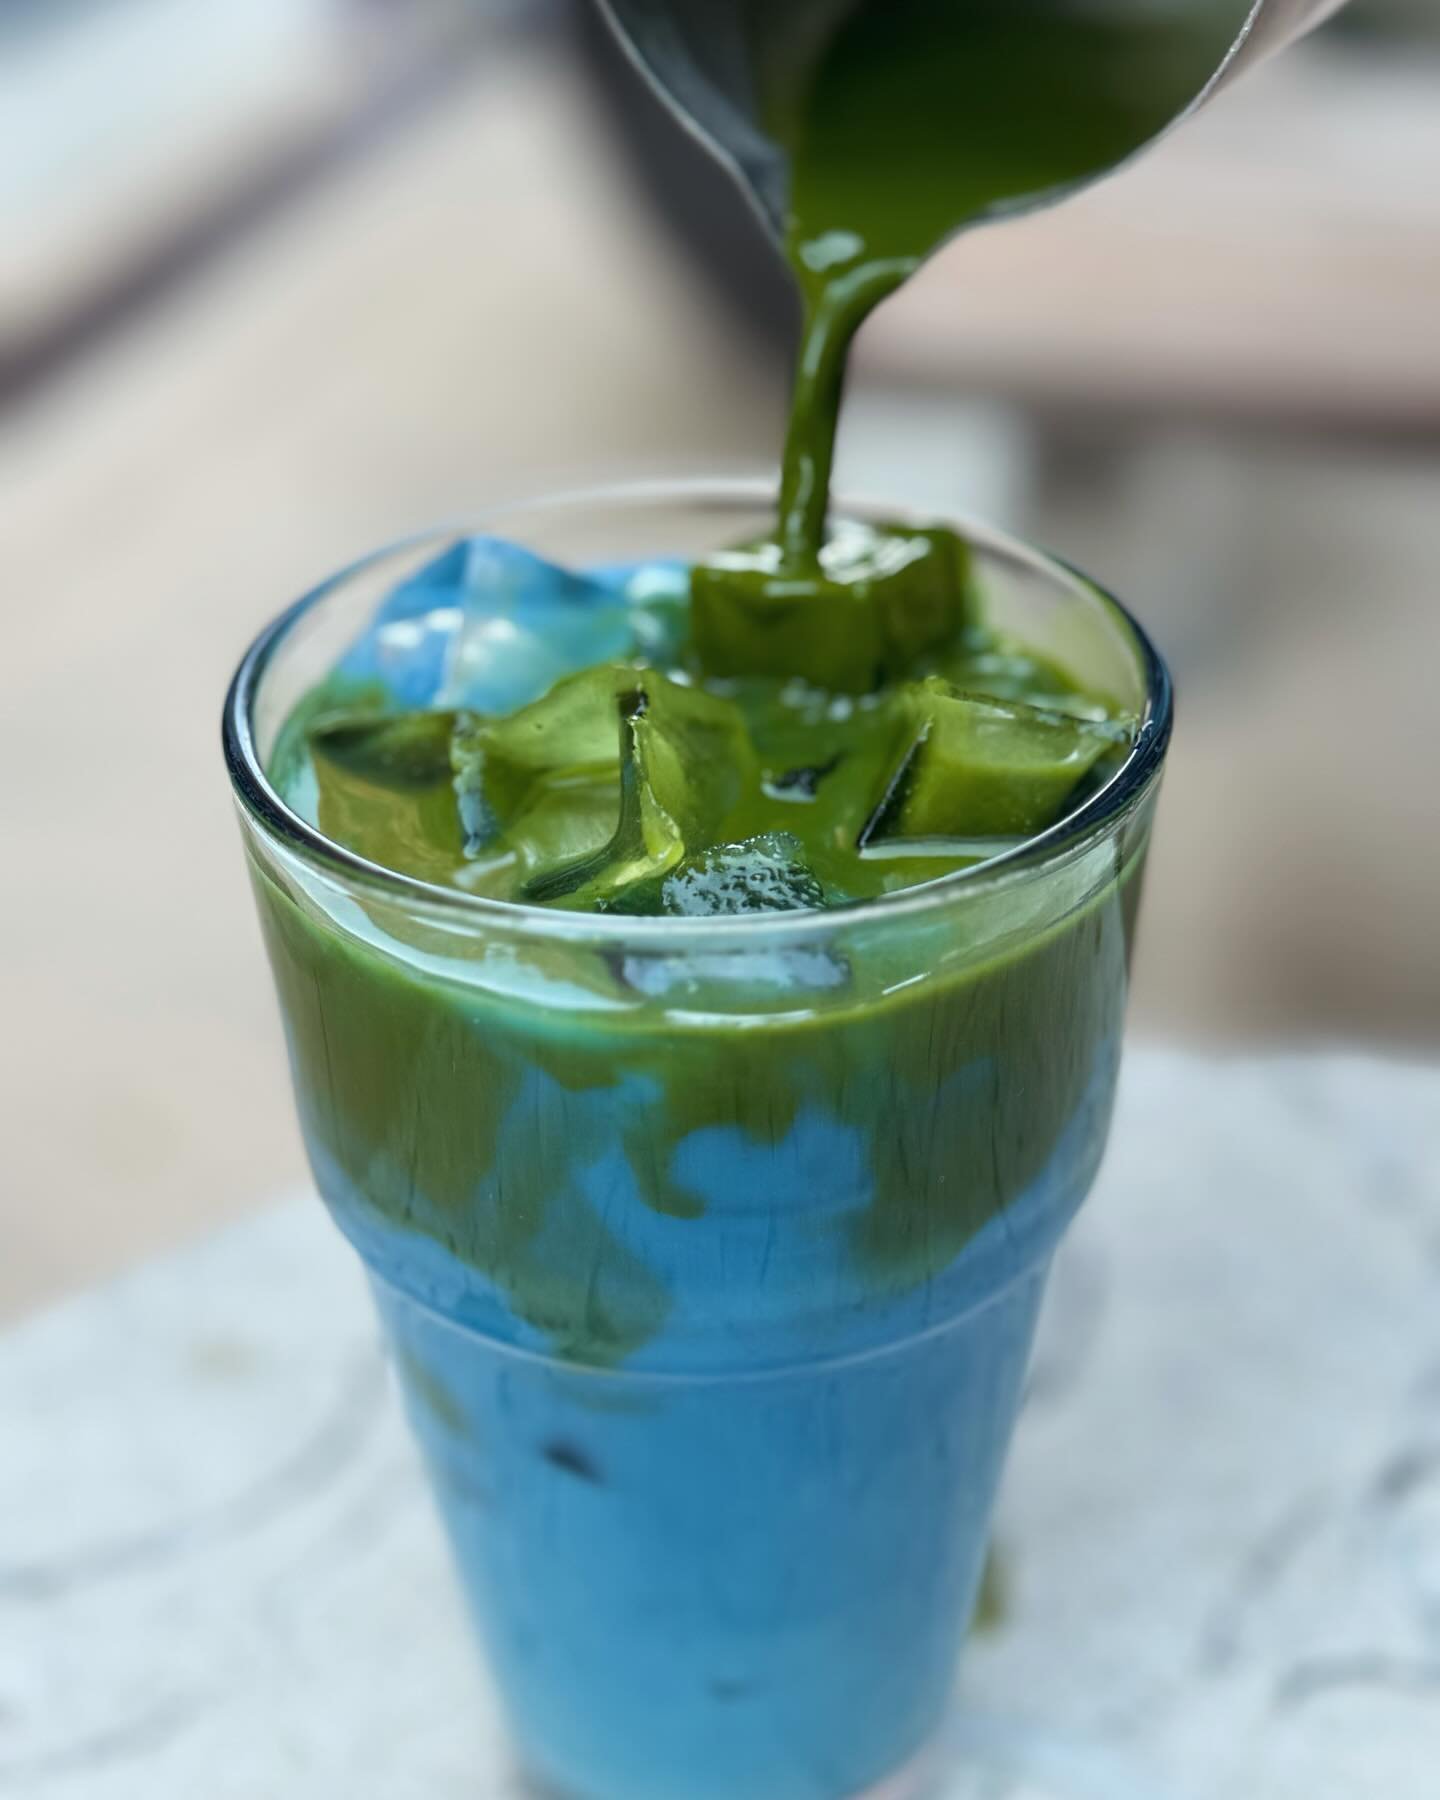 Love your mother 🌎 We&rsquo;re celebrating Earth Day all week long with an off-menu* specialty drink: Earth Day Matcha! An iced matcha latte with butterfly pea flower tea and a hint of vanilla 🦋

*not on the wall menu but available all week*